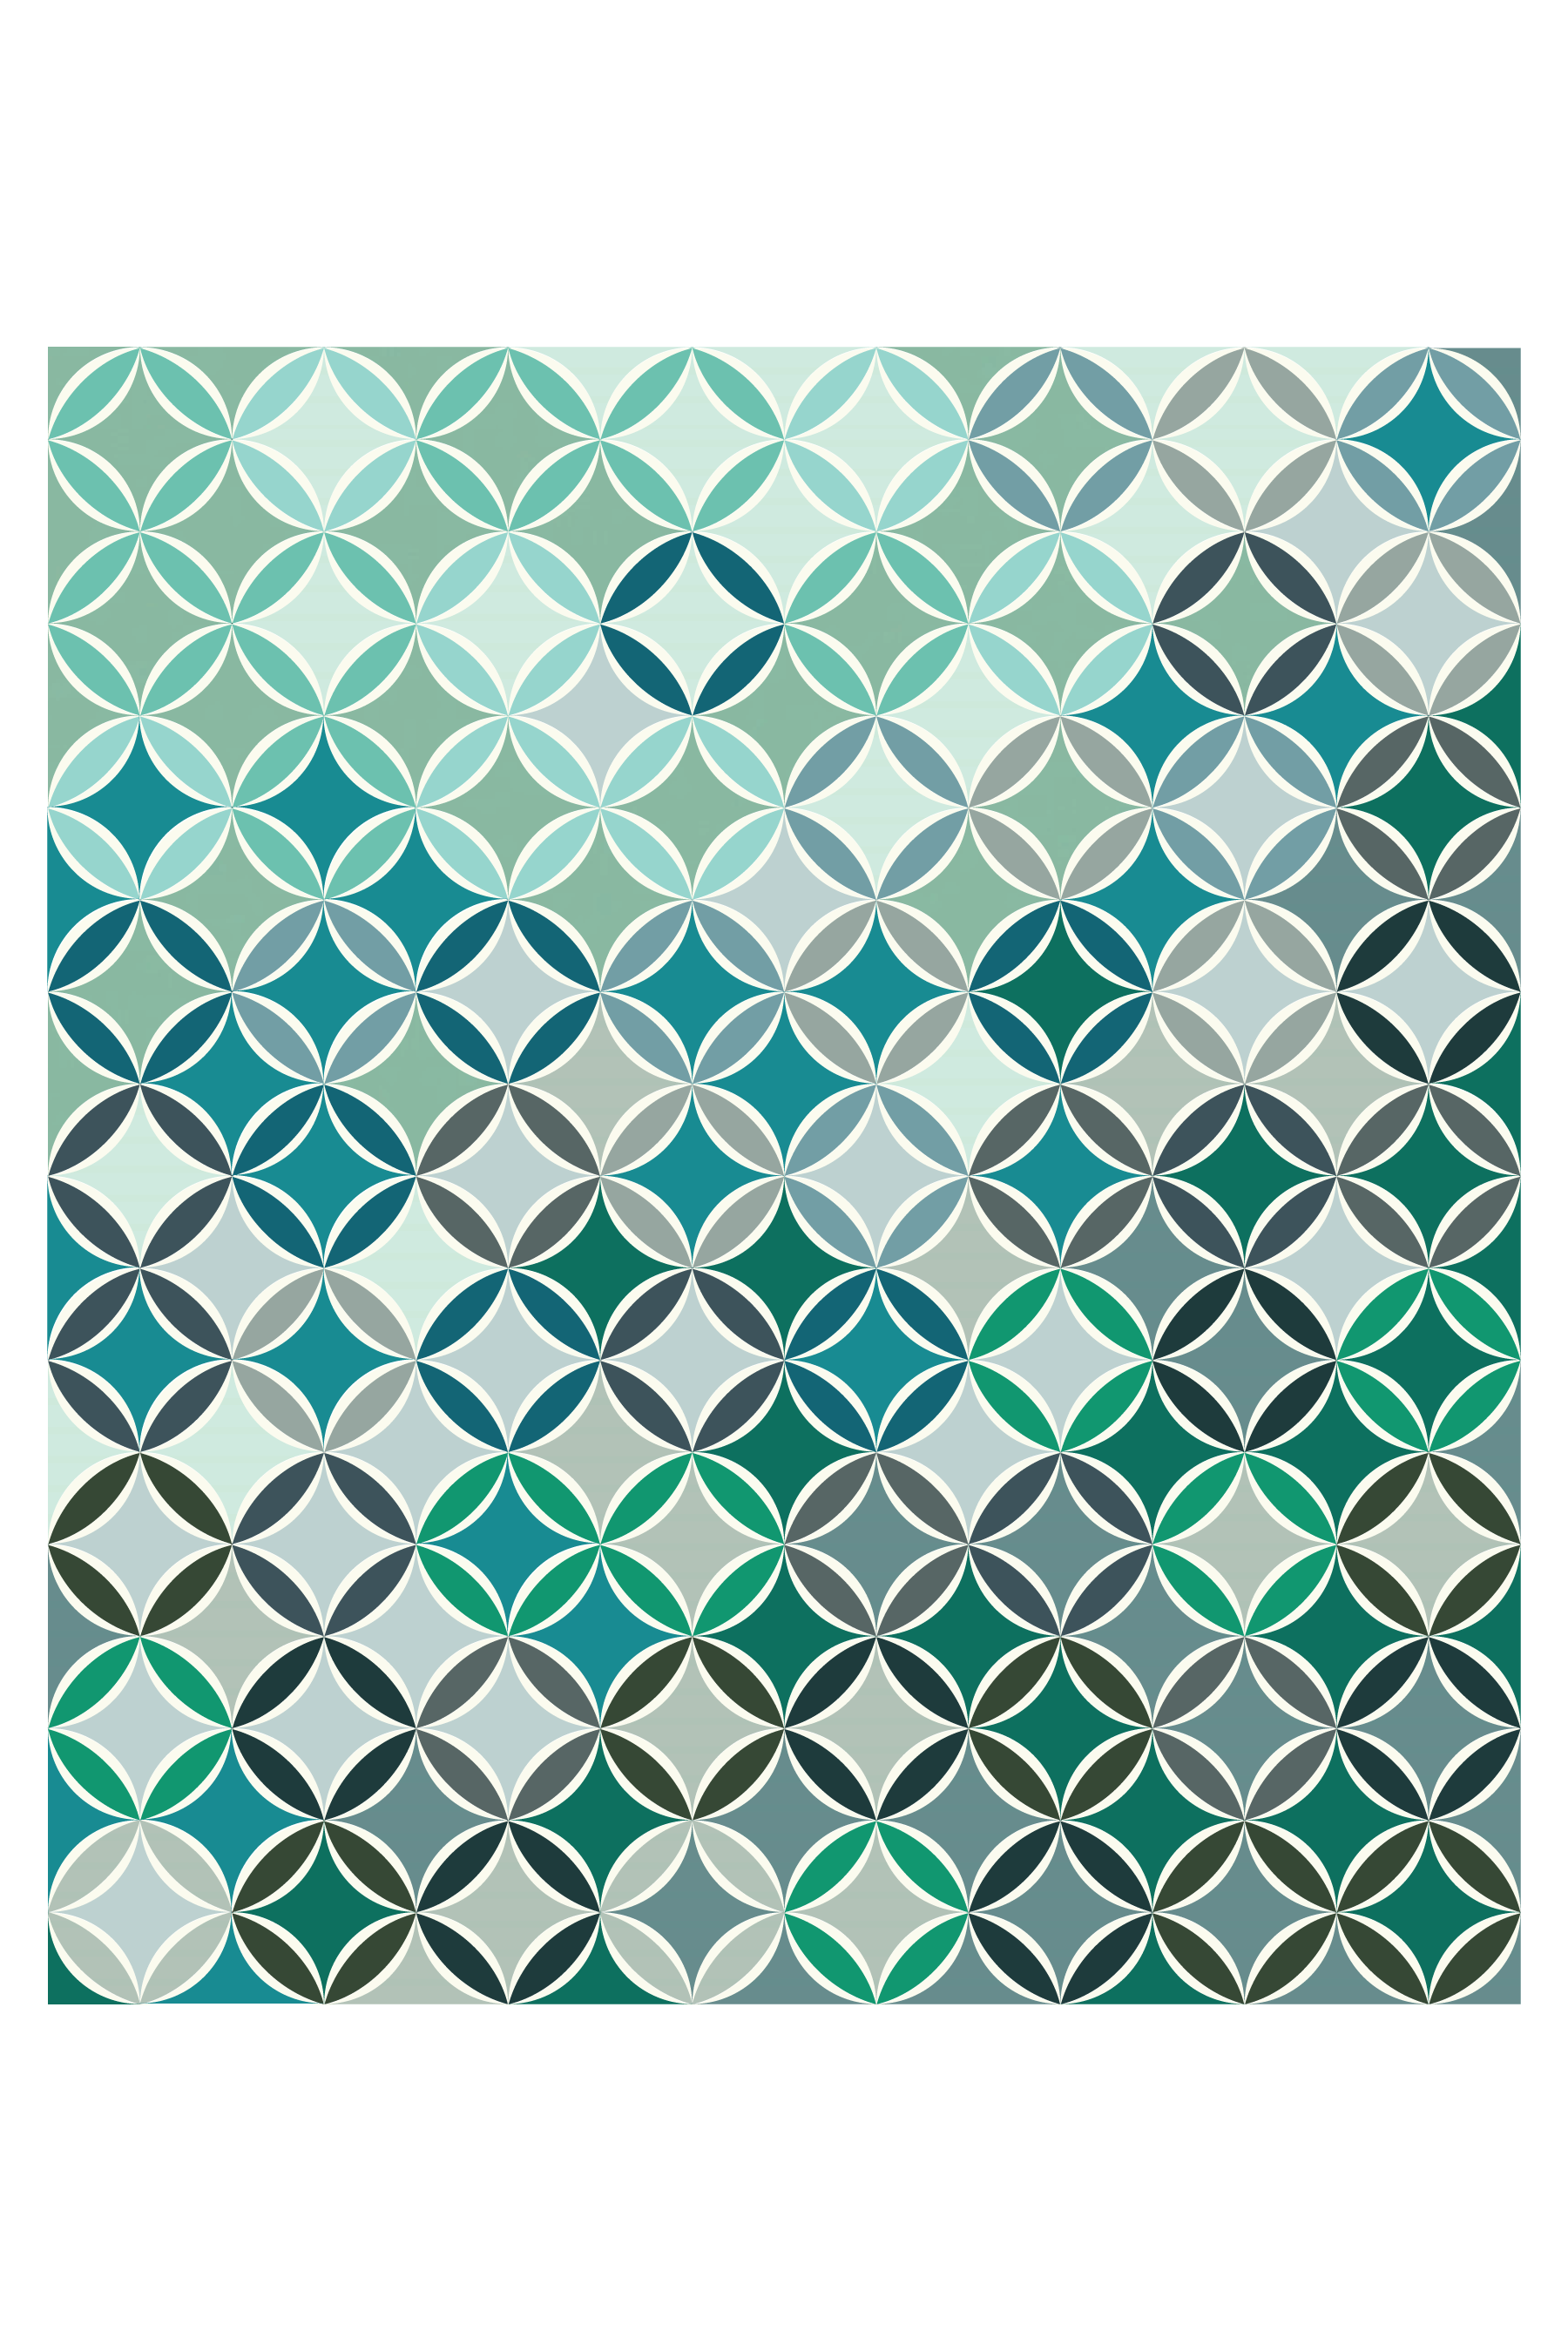 Scrappy Windows - Summering - Small Throw Quilt Kit